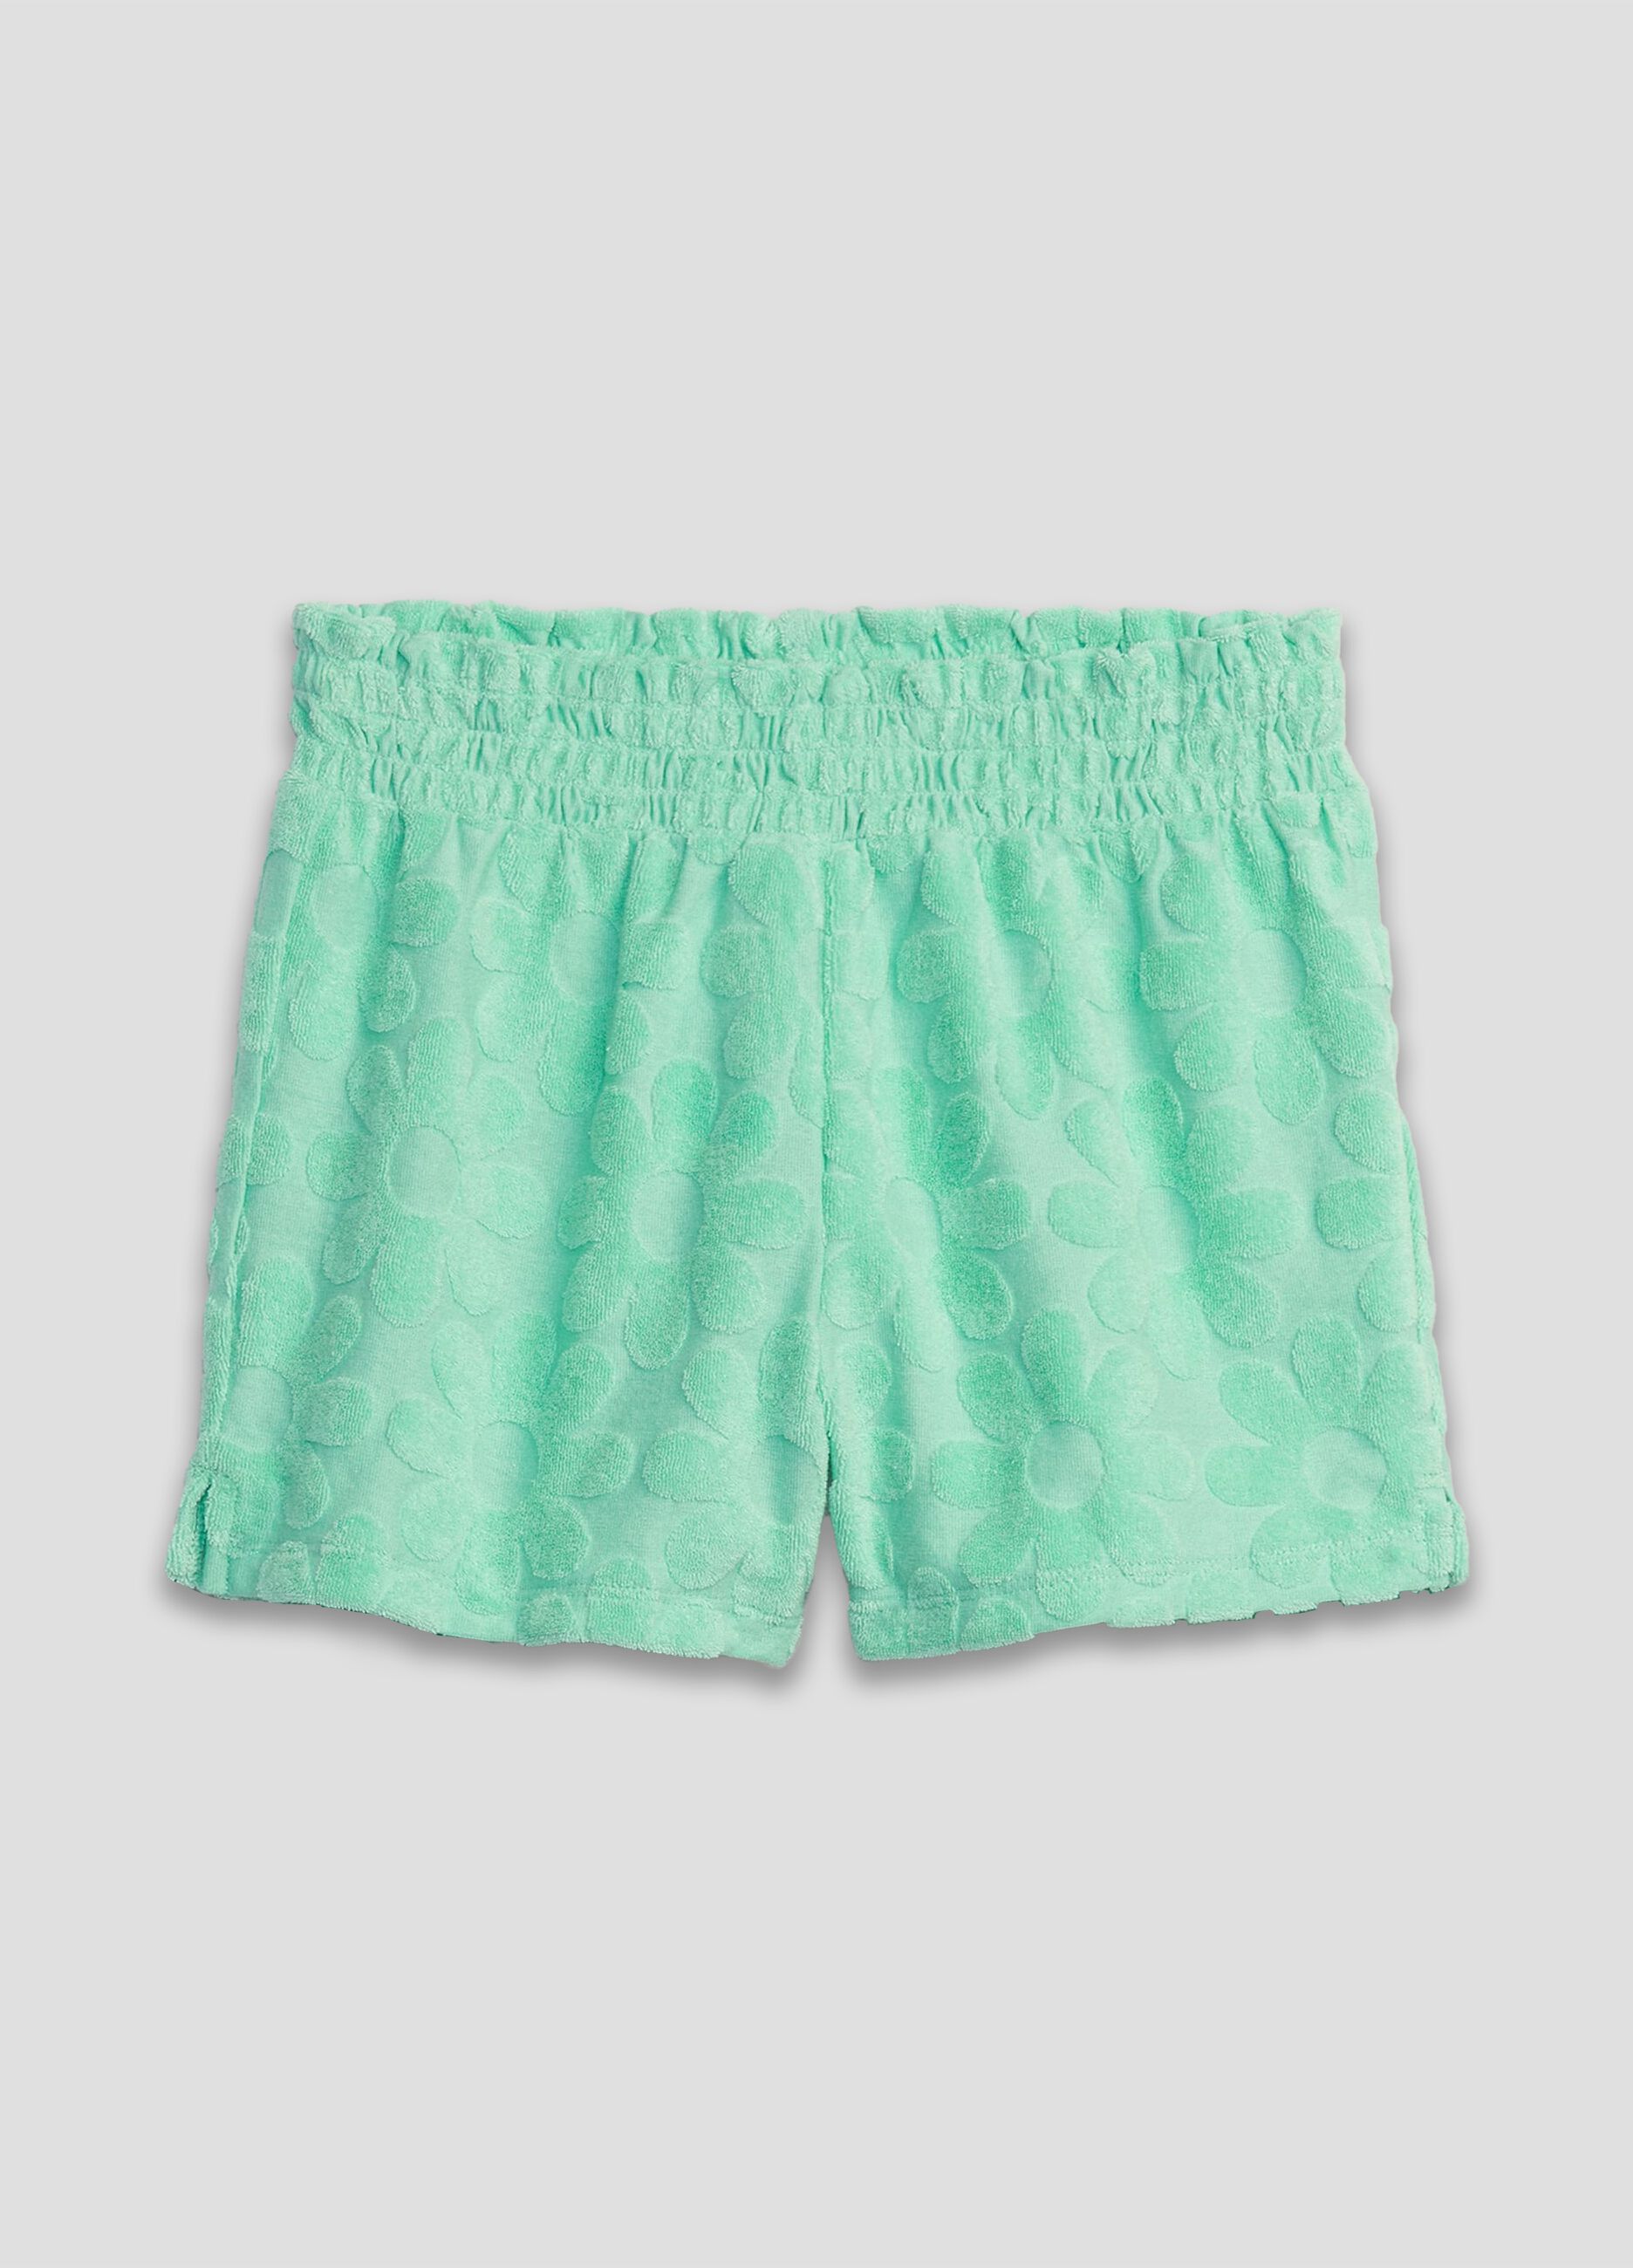 French terry shorts with raised flowers